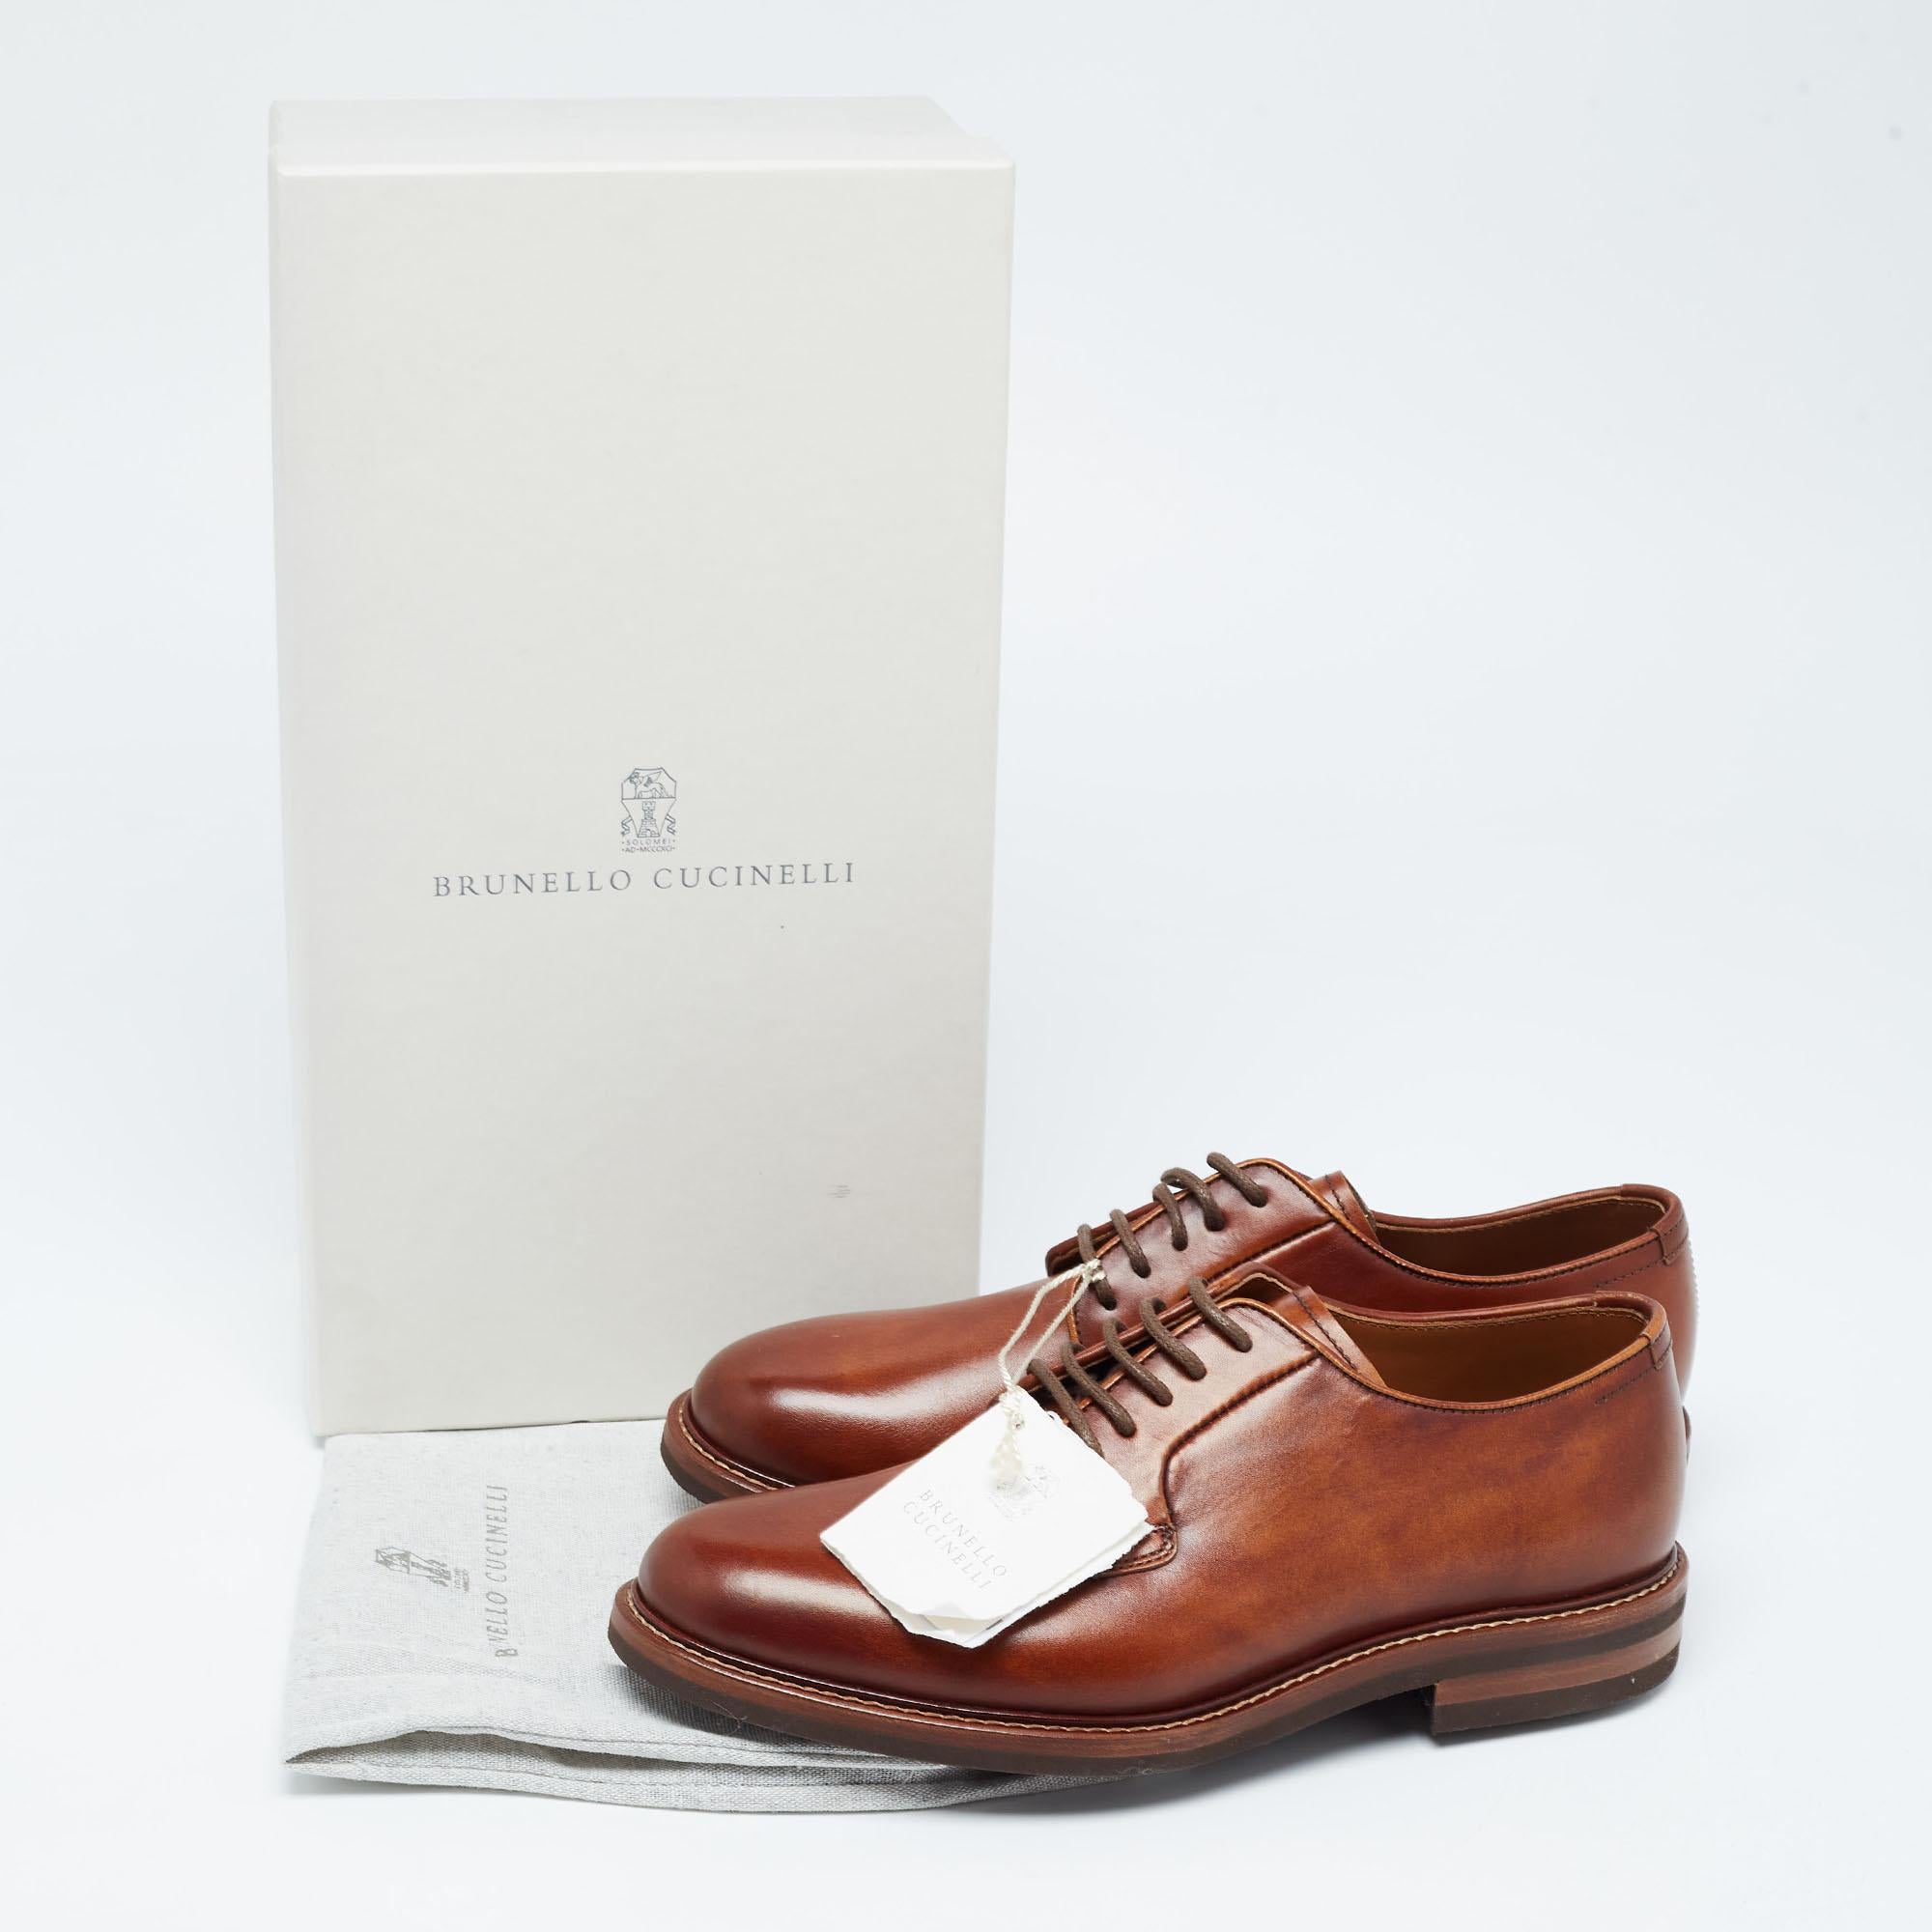 Brunello Cucinelli Brown Leather Lace Up Derby Size 42 5